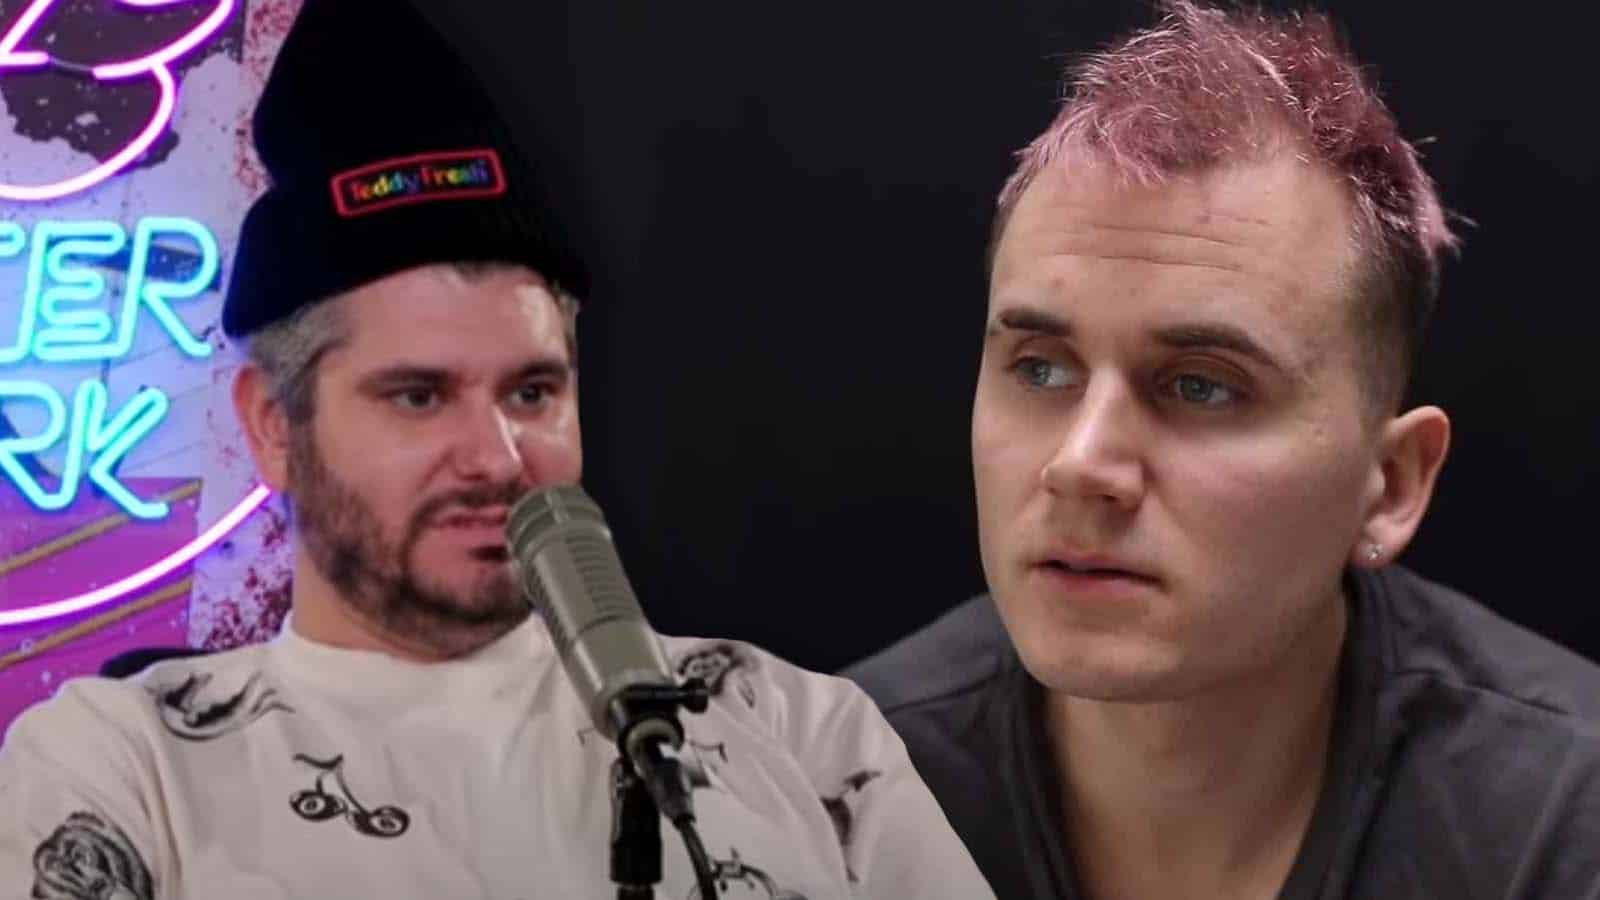 Ethan Klein exposes Durte Dom after claims he "reunited" with Dobrik